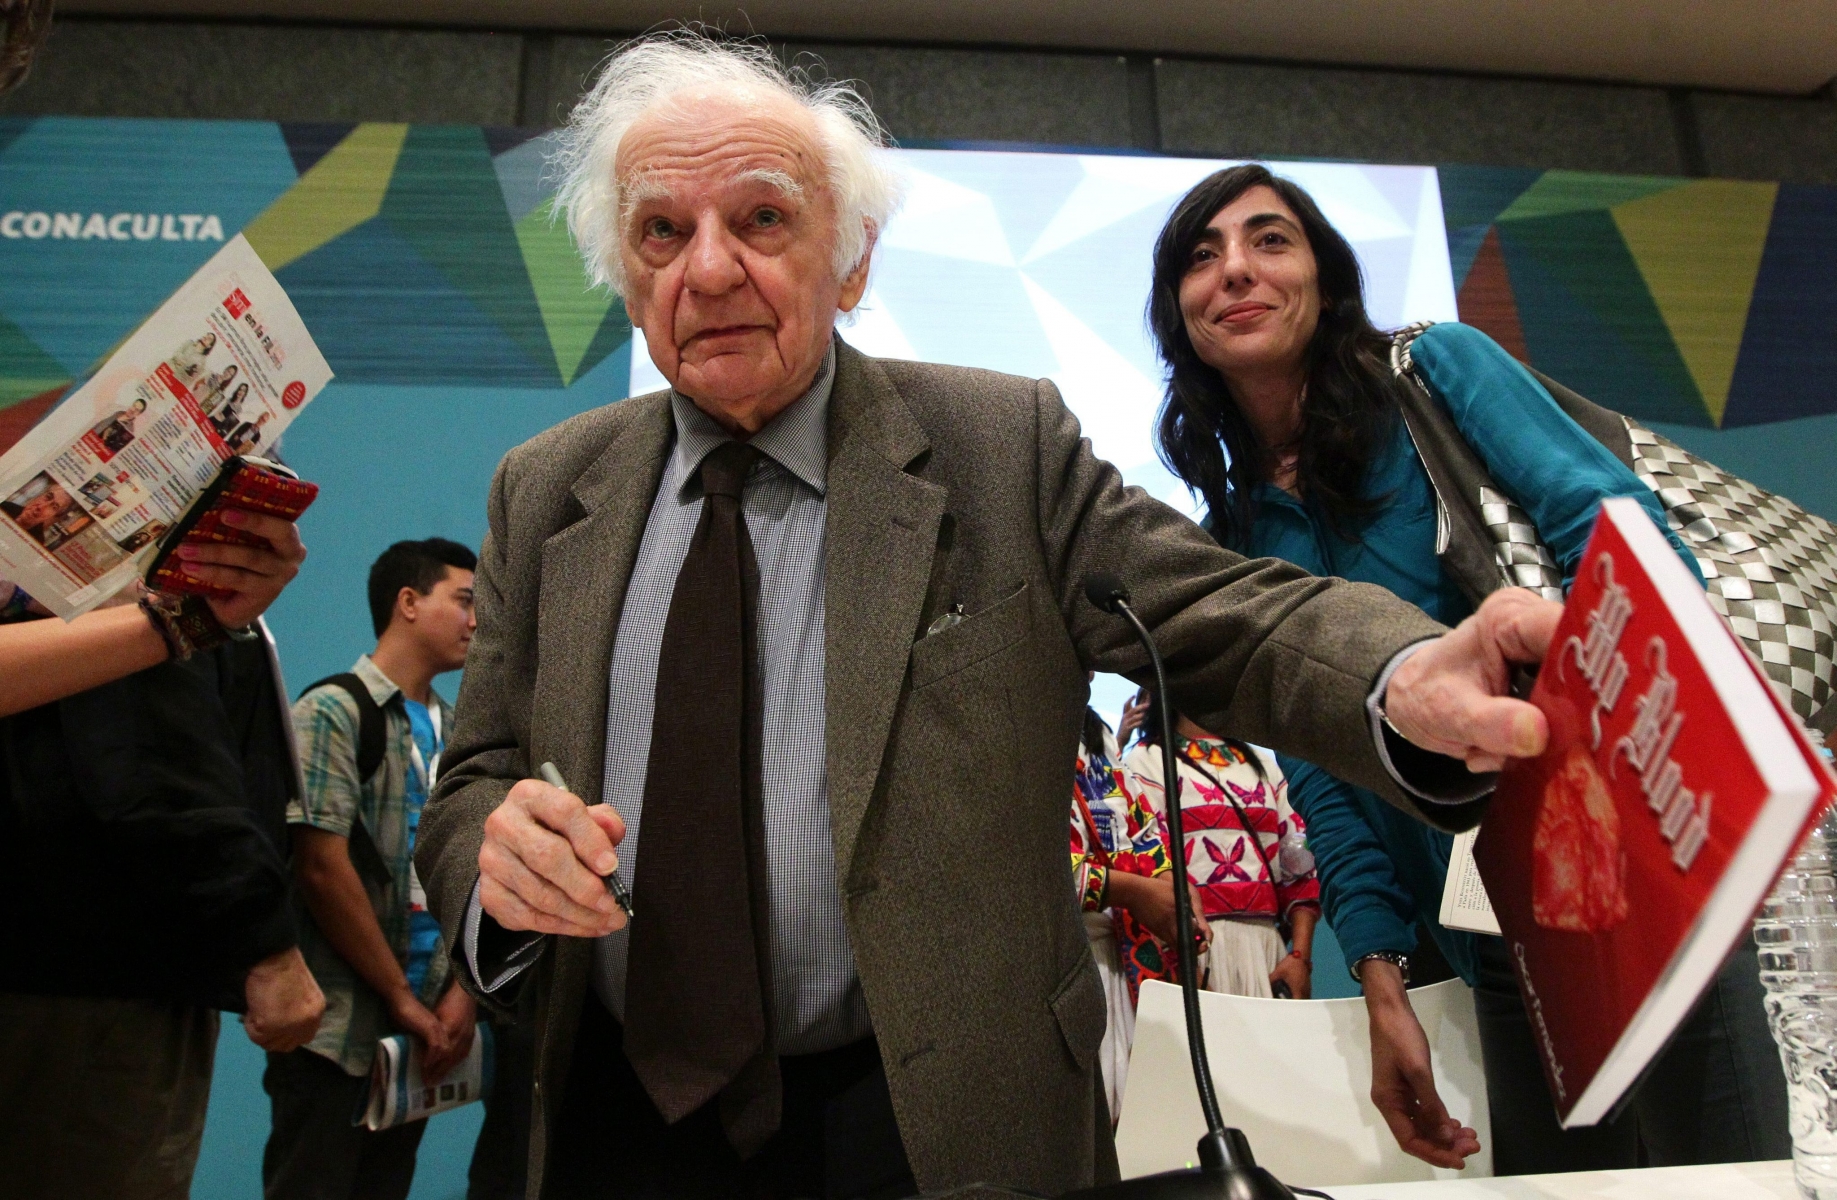 epa05402744 (FILE) A file picture dated 02 December 2013 shows French poet and essayist Yves Bonnefoy (C) during the 'One thousand young people with Yves Bonnefoy' conference at the 27th International Guadalajara Book Fair in Guadalajara, Jalisco State, Mexico. According to French media, French poet and essayist Yves Bonnefoy died in Paris, France, at the age of 93 on 01 July 2016.  EPA/ULISES RUIZ BASURTO FILE MEXICO LITERATURE YVES BONNEFOY OBIT